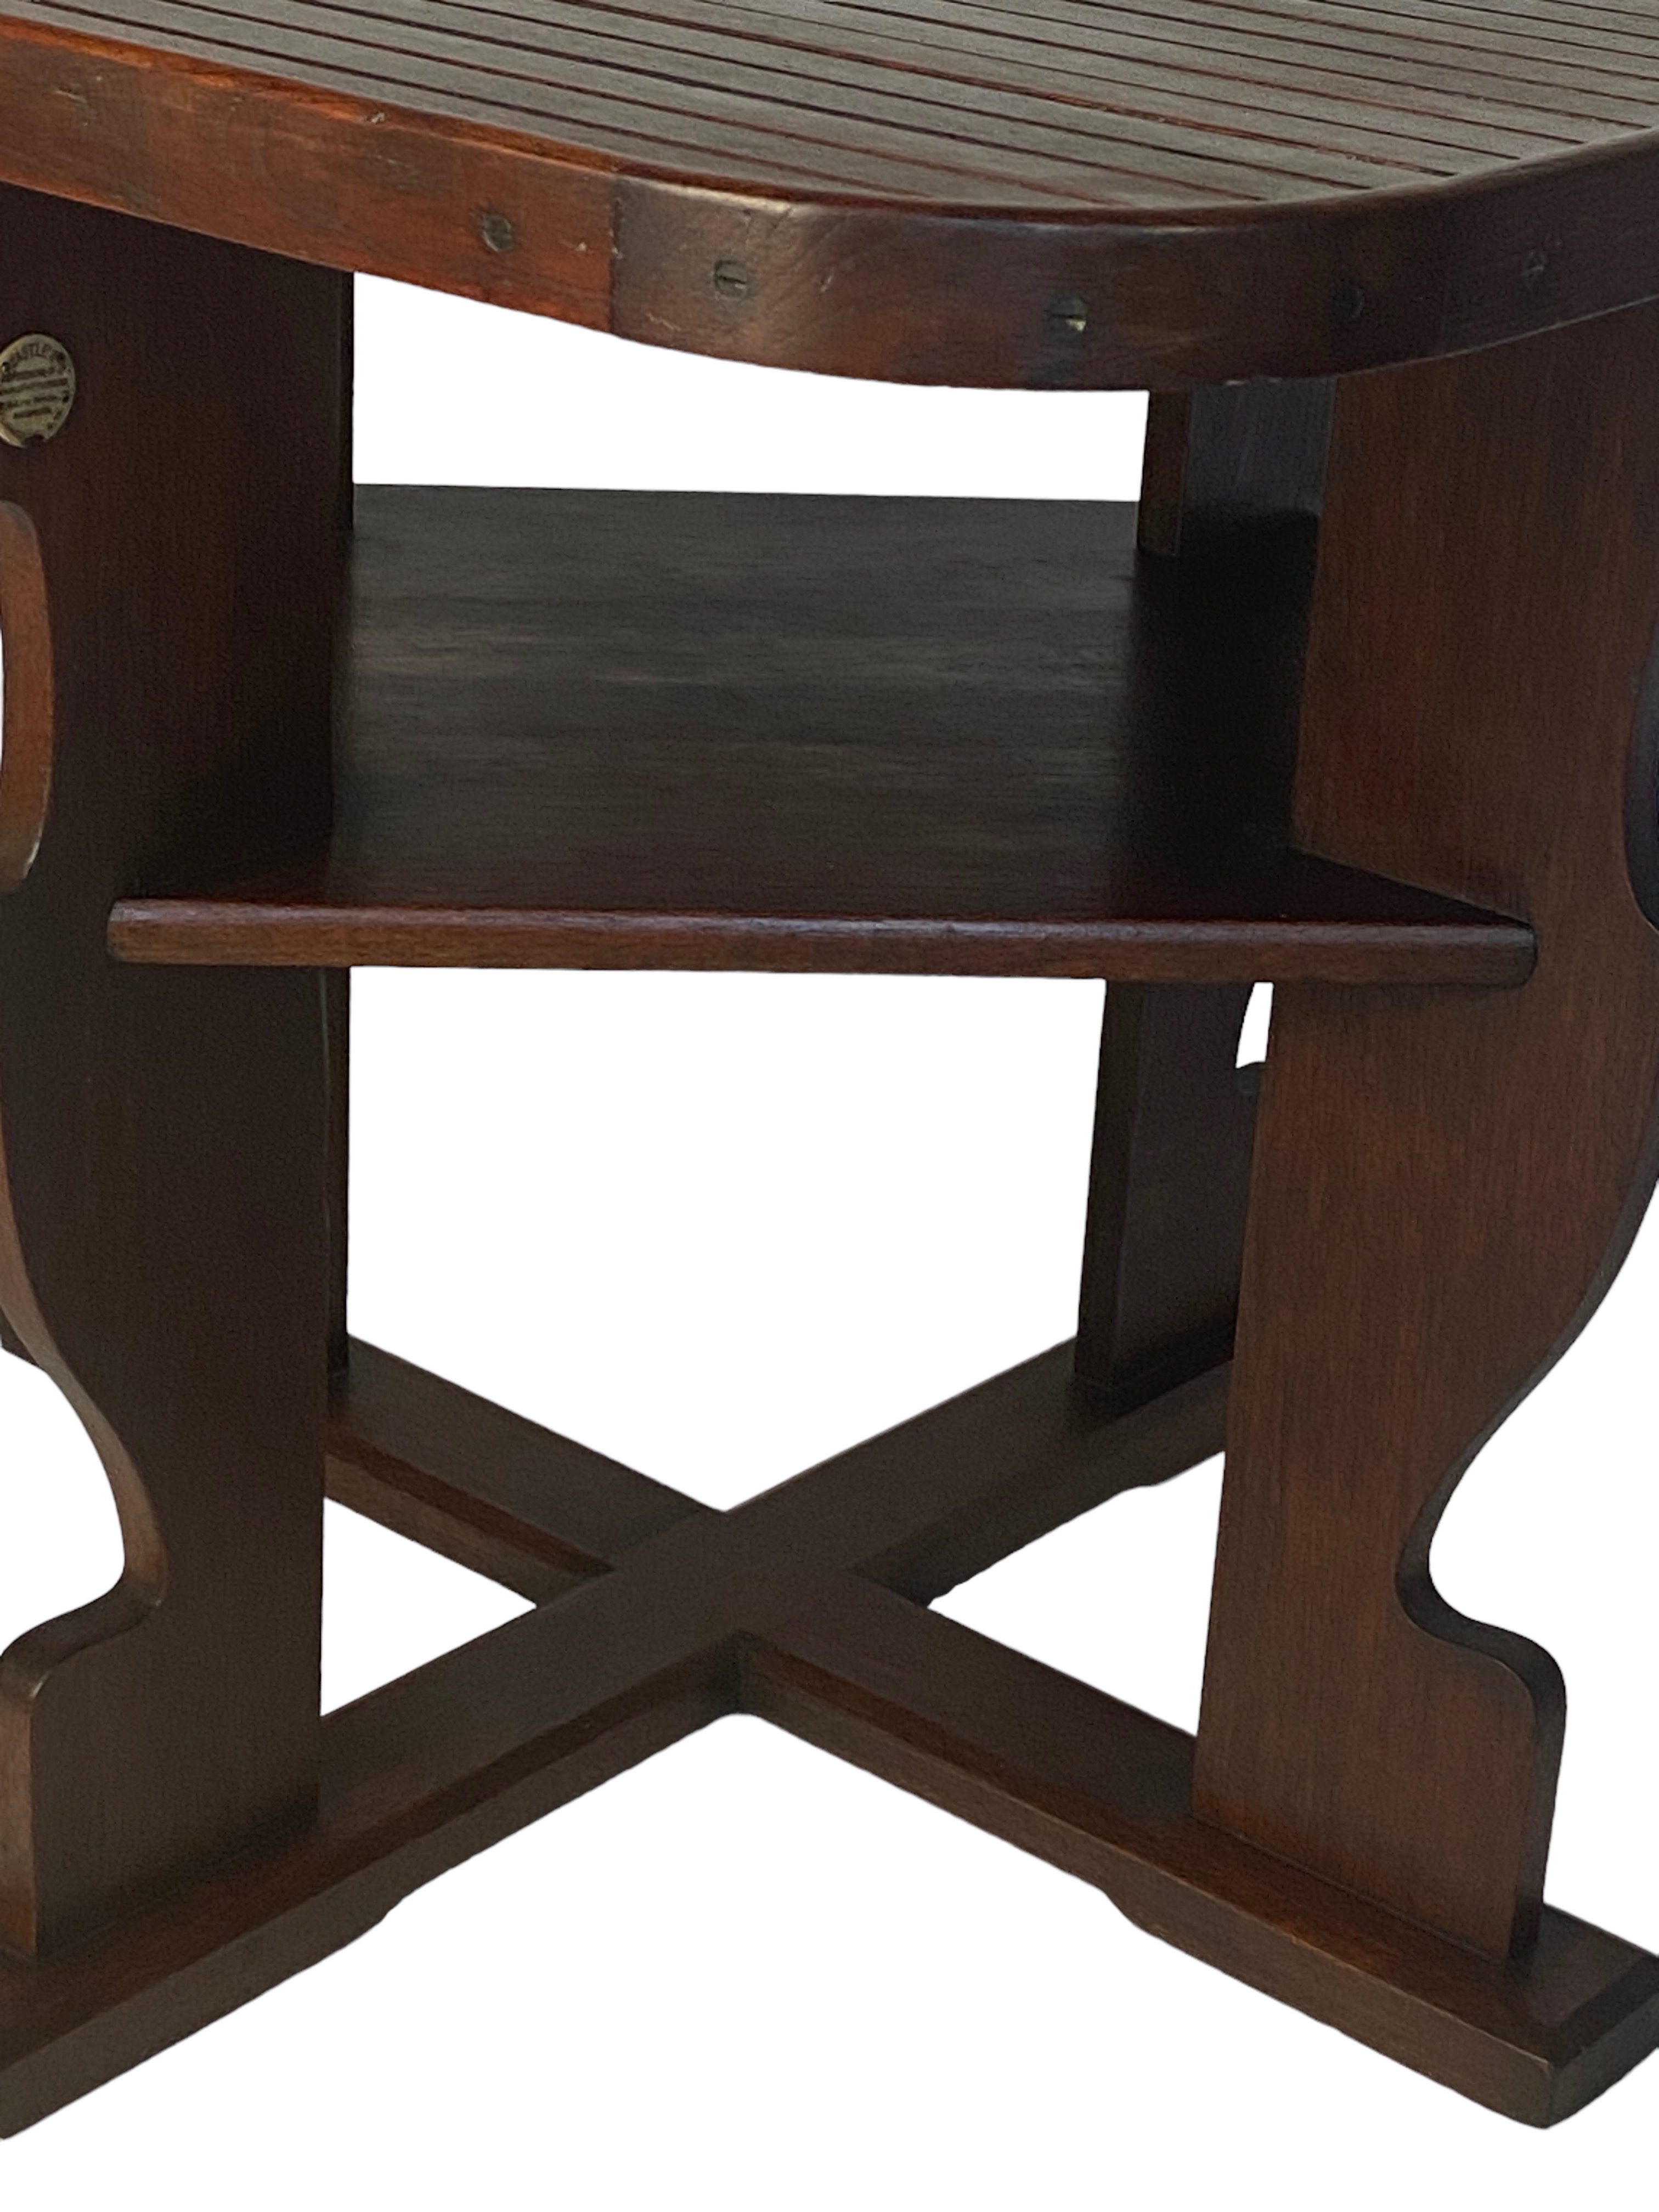 A 1930's Art Deco teak Collingwood design garden set of table and chairs by Castle's of London proba - Image 5 of 8